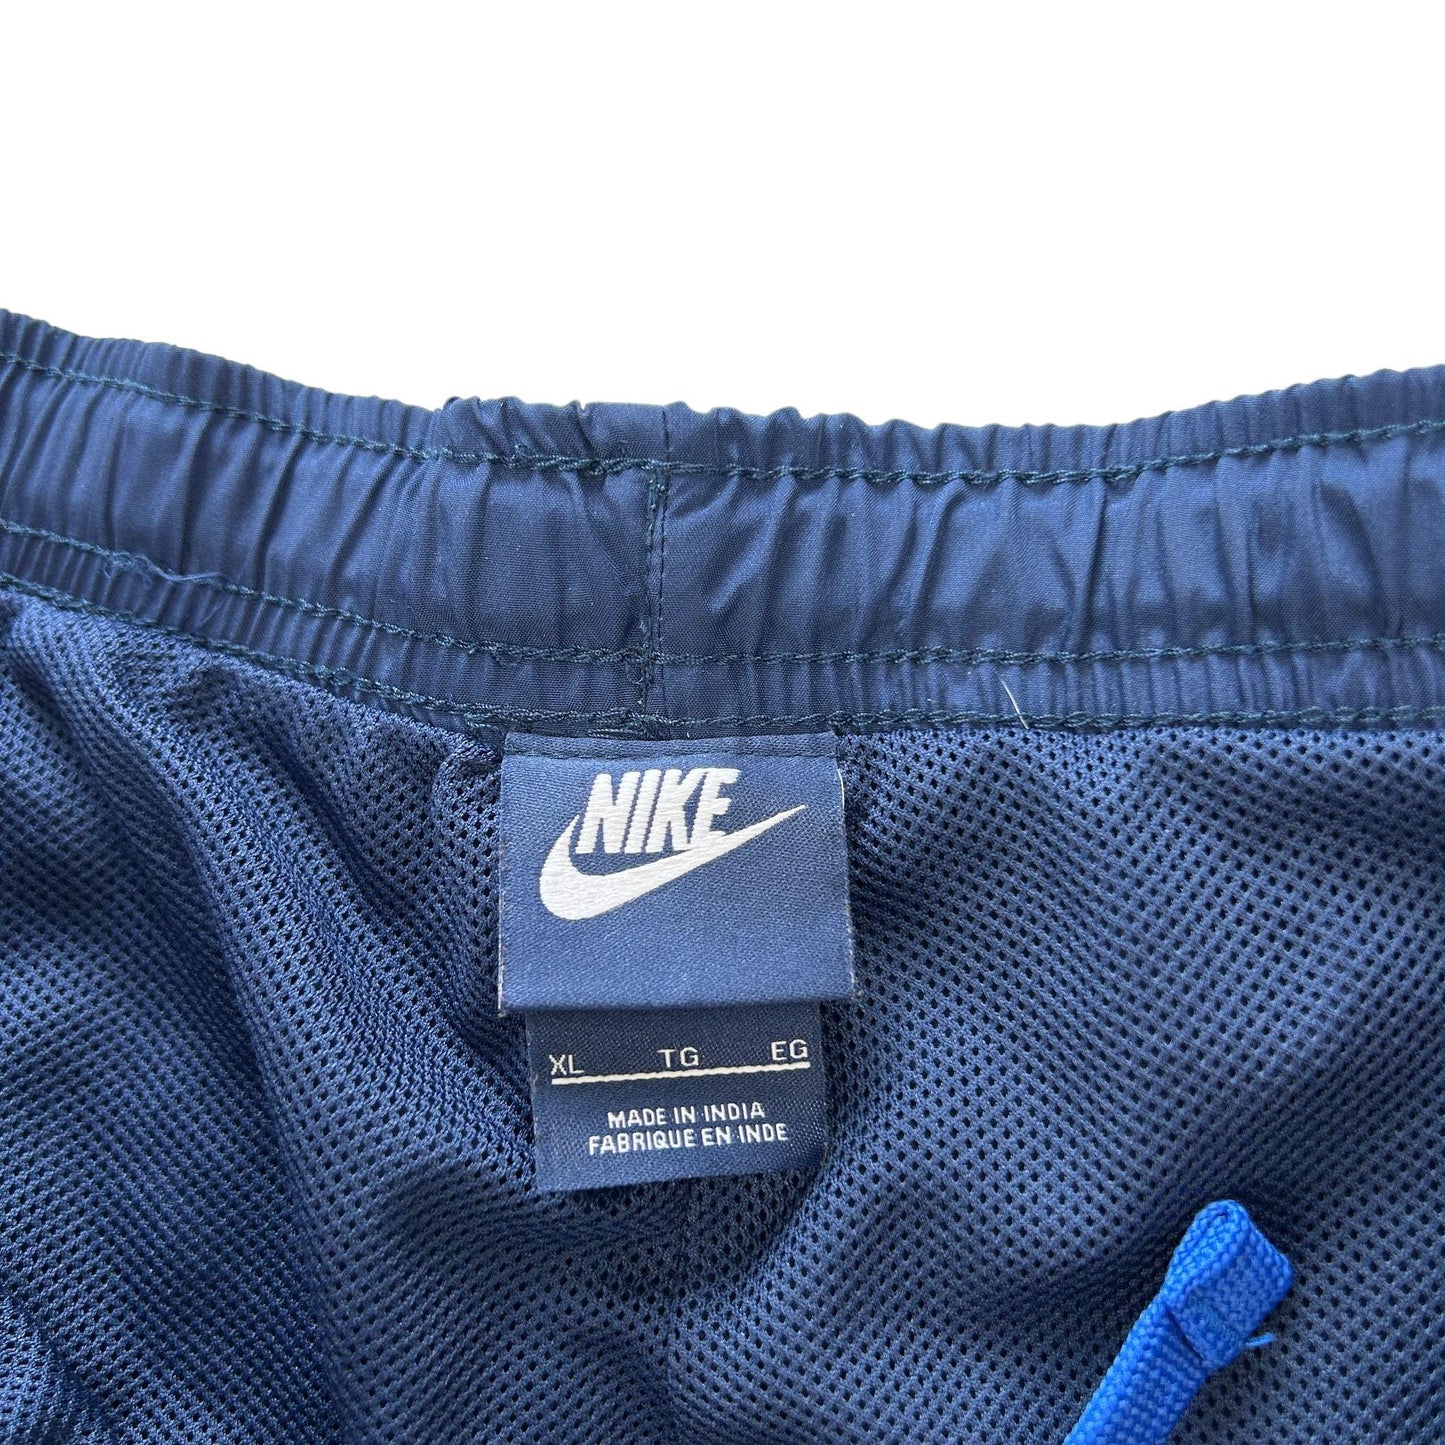 Nike Tracksuit Bottoms Size W34 - Known Source